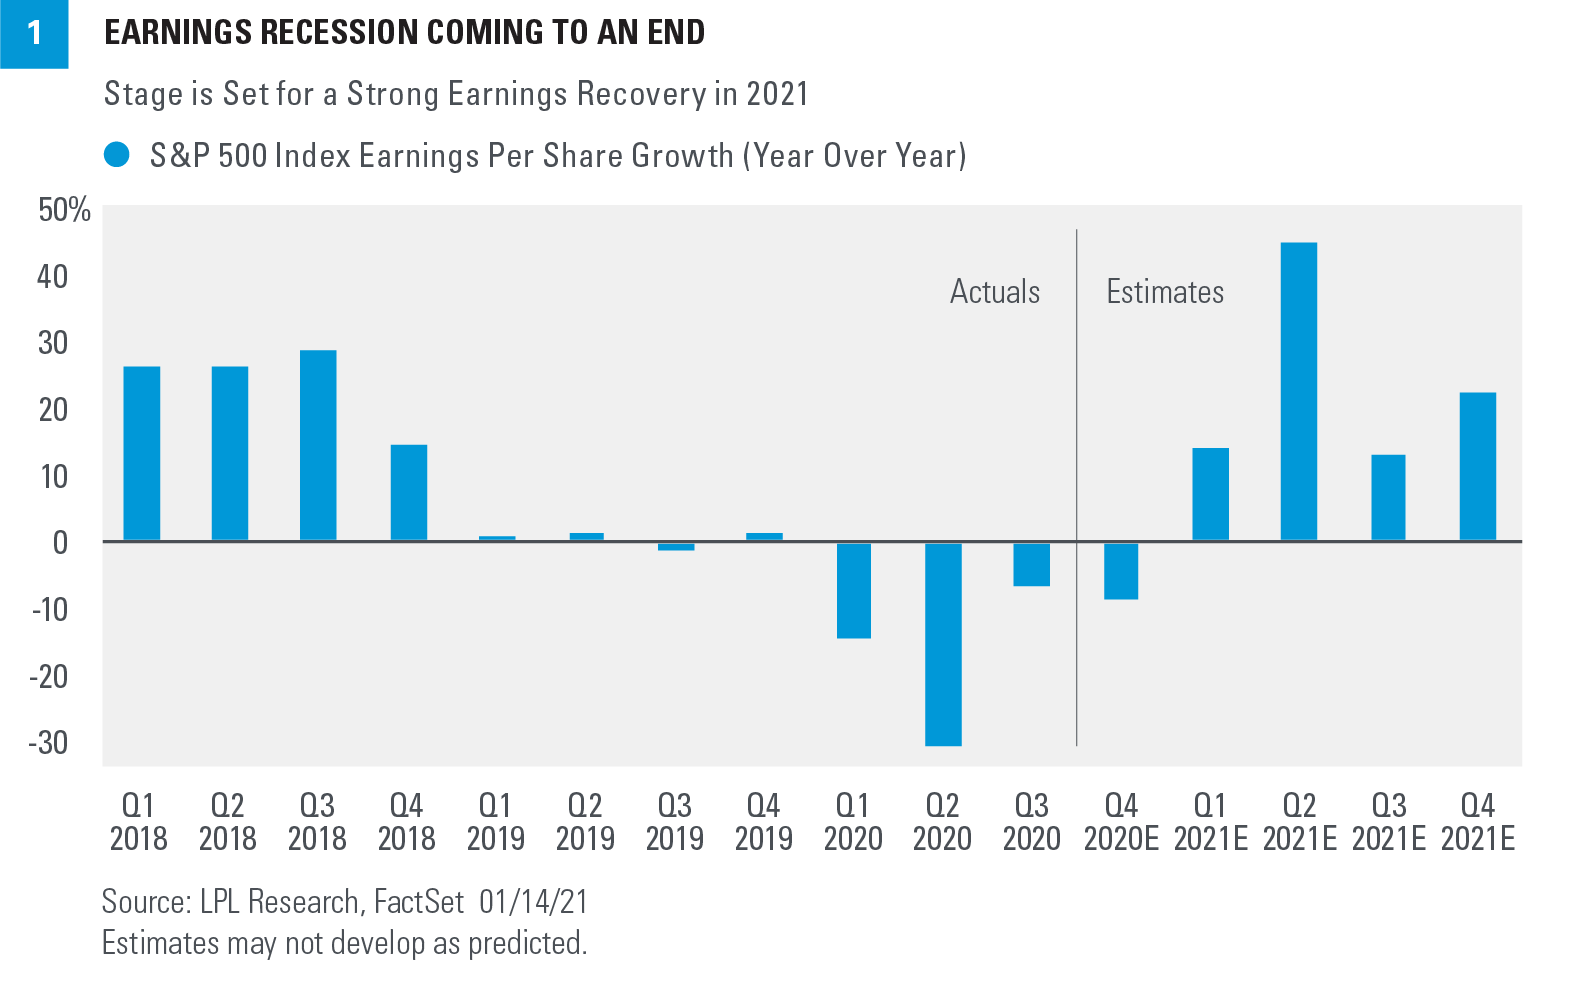 Chart - Earnings Recession Coming to an End